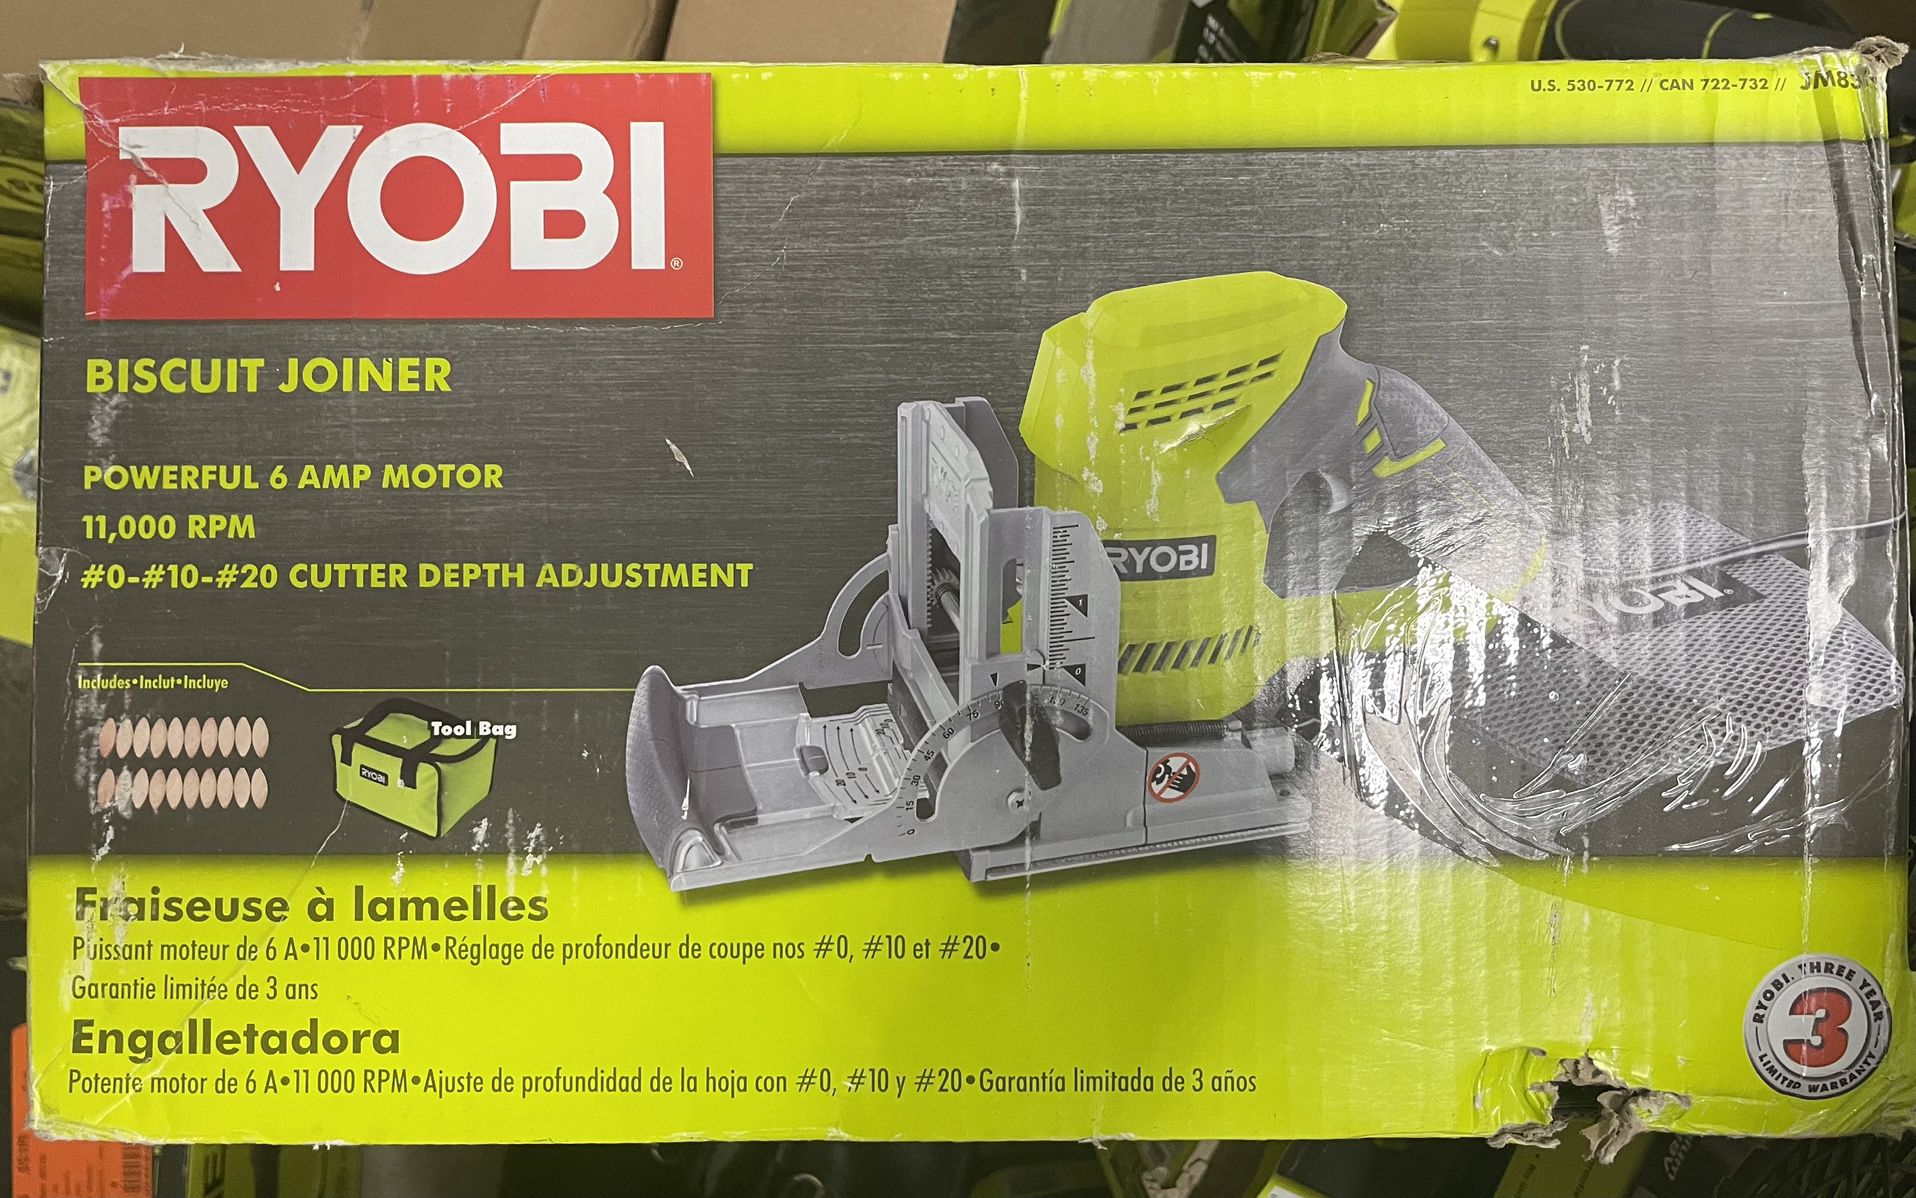 Ryobi 6 Amp Corded AC Biscuit Joiner Kit with Dust Collector and Bag